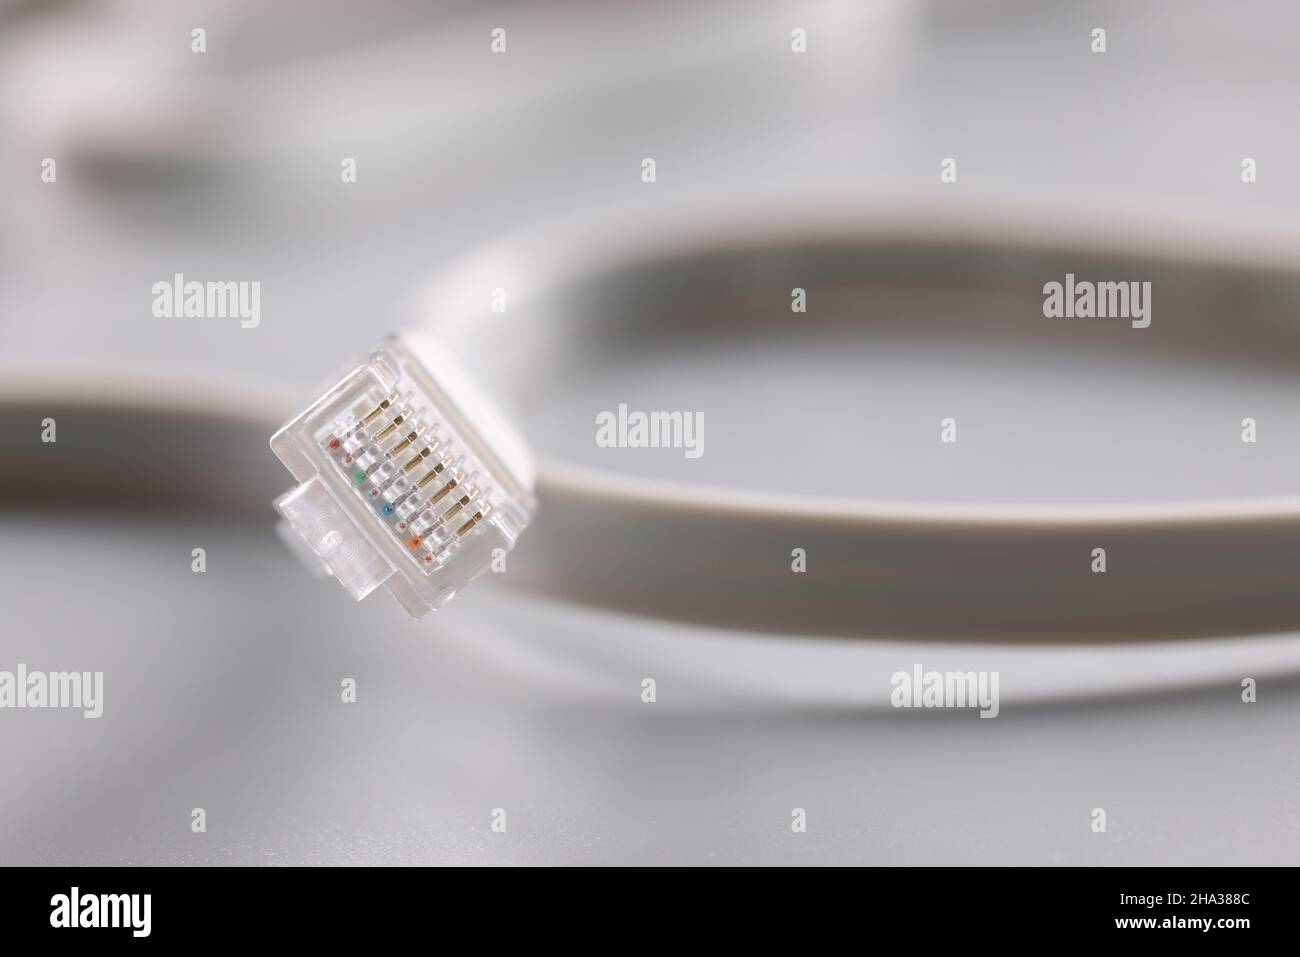 Computer patch cord cable on gray background. Fiber optic communication concept Stock Photo